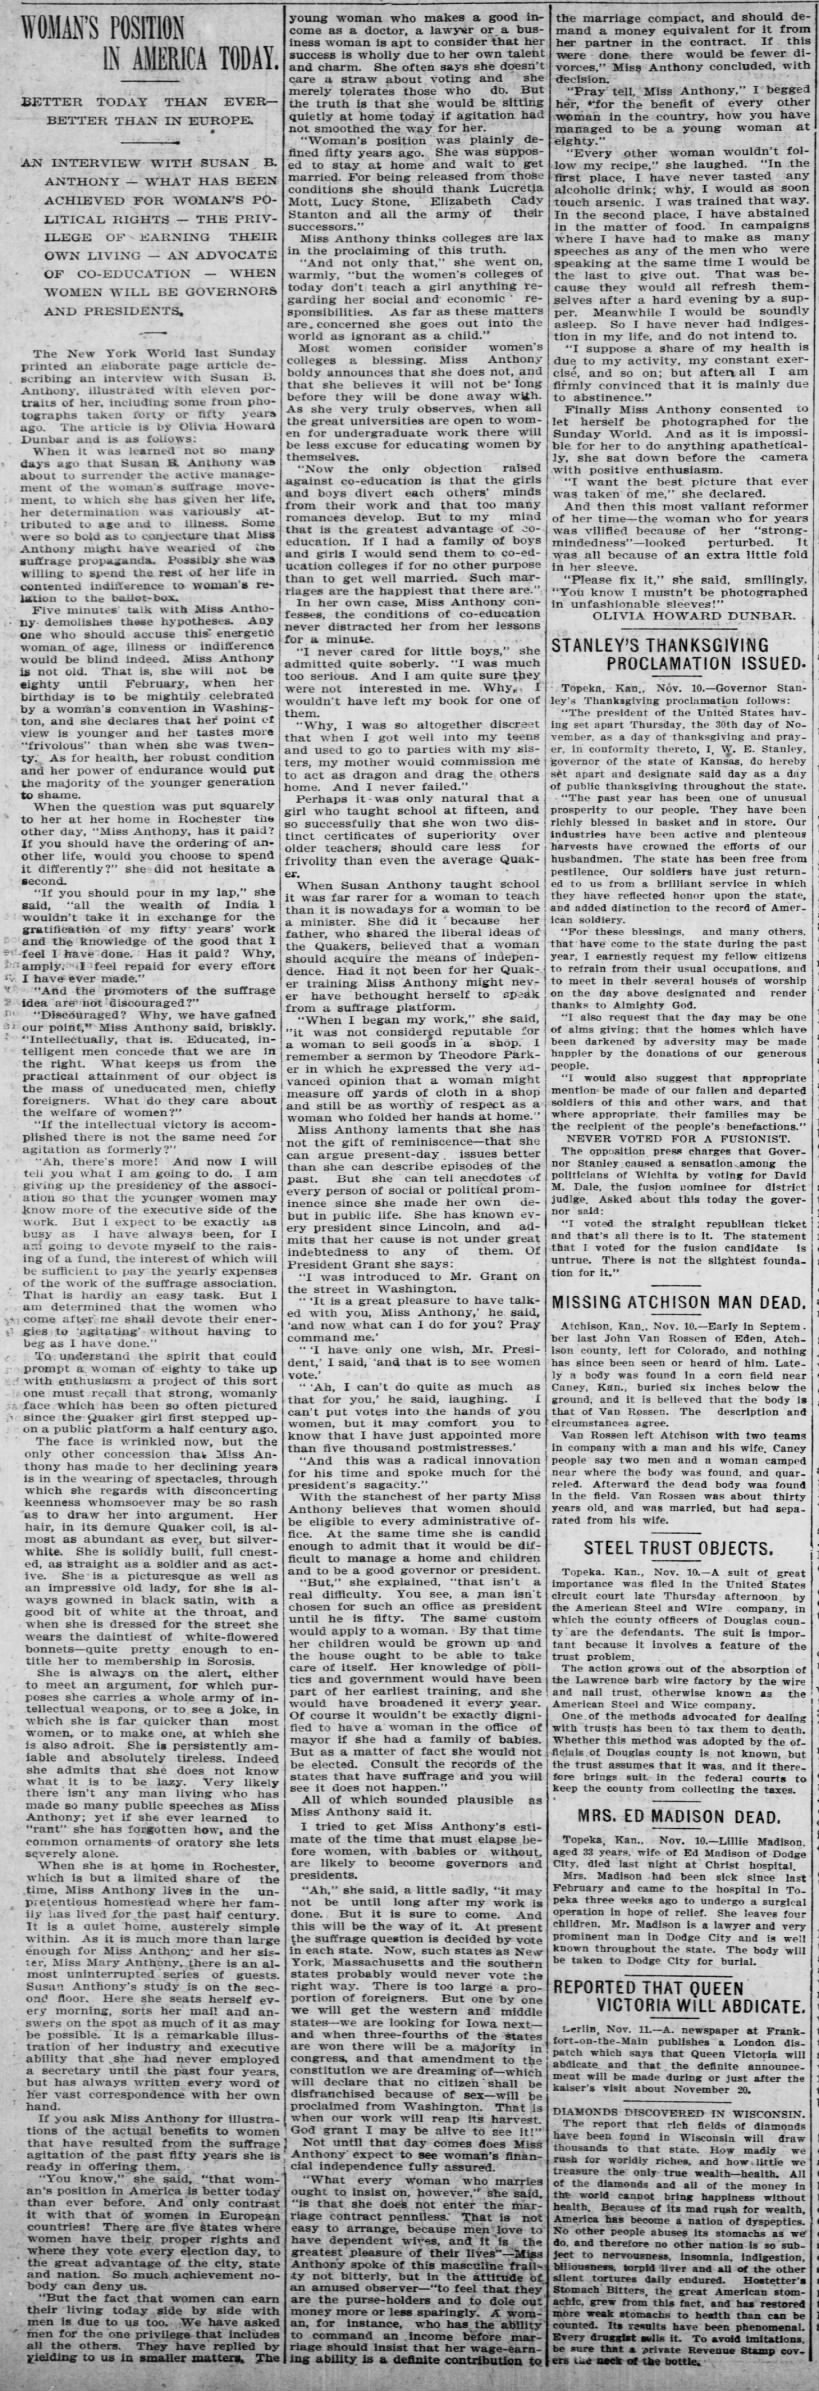 Interview with Susan B. Anthony (1899)